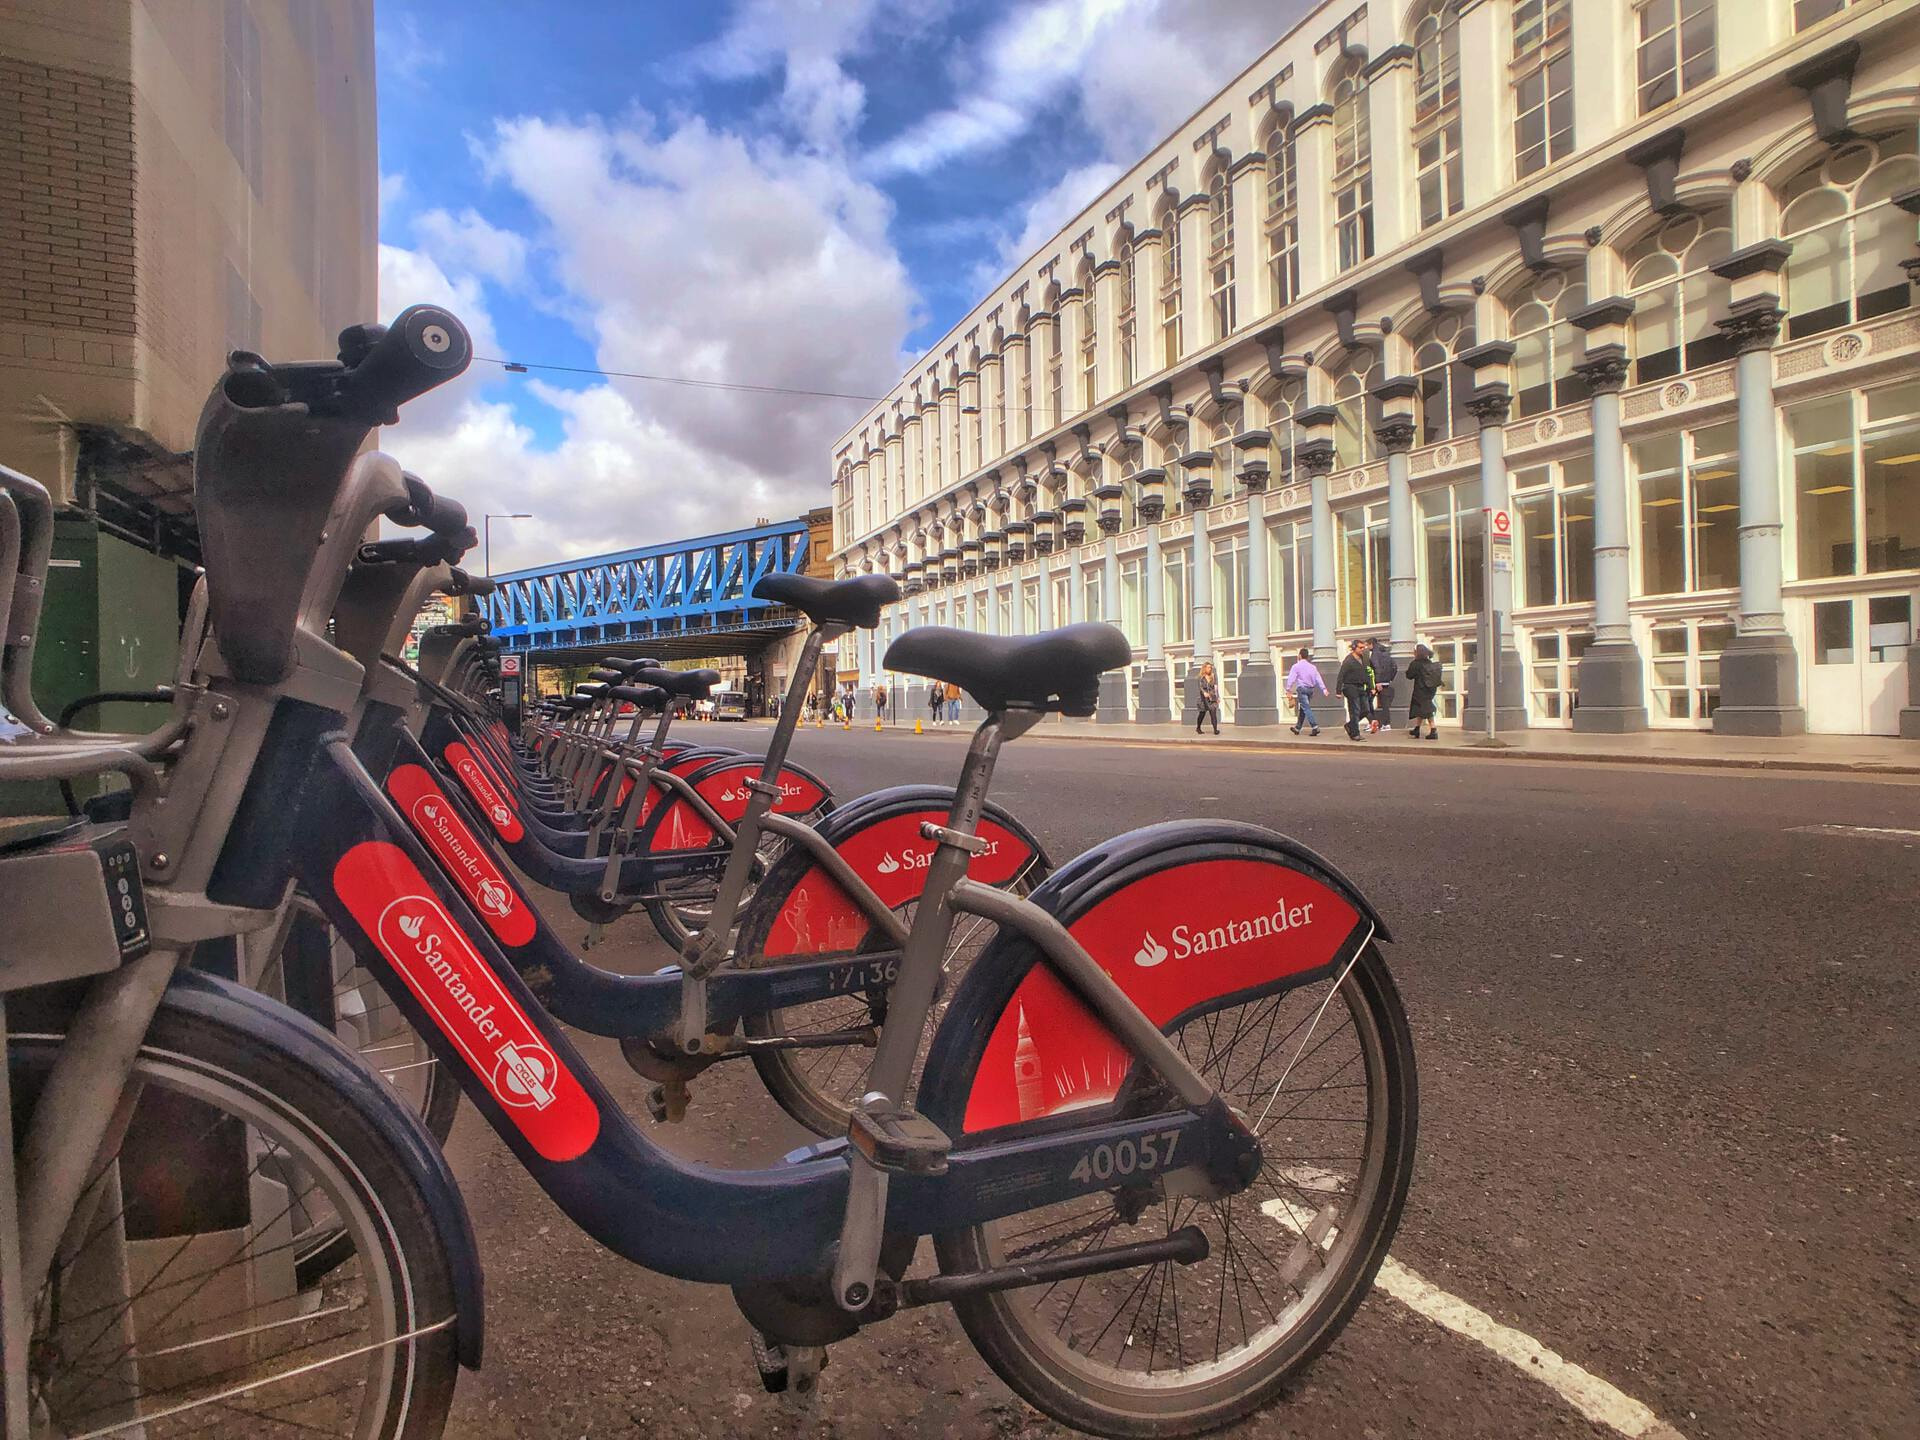 Station-based sharing bicycles in the UK.